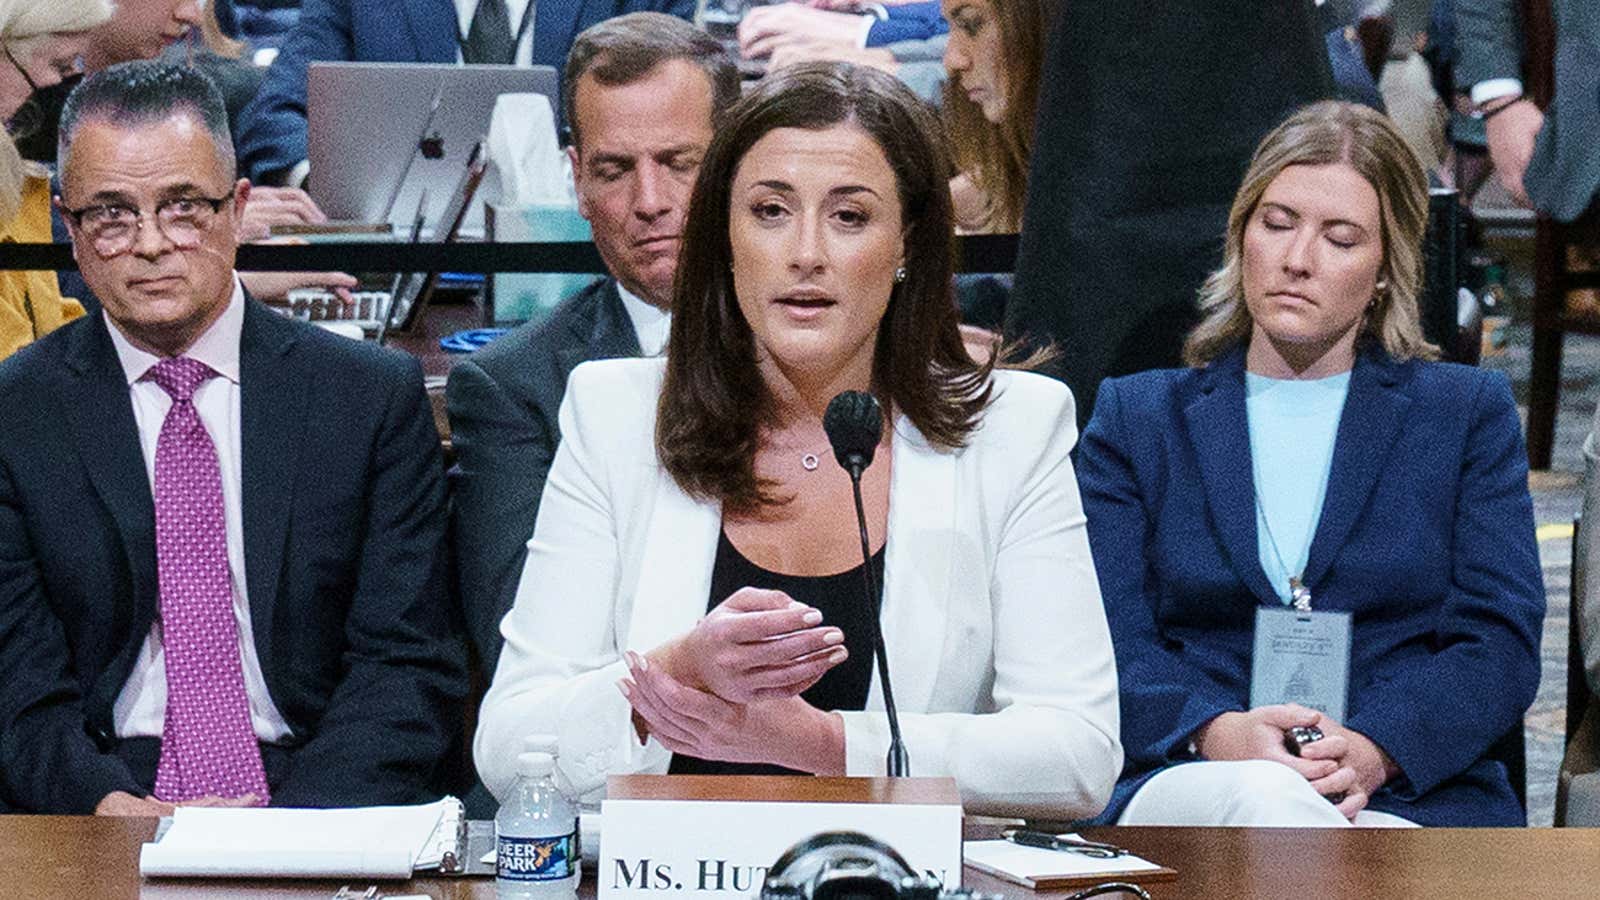 Cassidy Hutchinson, who was an aide to former White House Chief of Staff Mark Meadows during the administration of former U.S. President Donald Trump, testifies during a public hearing of the U.S. House Select Committee investigating the January 6 Attack on the U.S. Capitol, at the Capitol, in Washington, U.S., June 28, 2022. Mandel Ngan/Pool via REUTERS